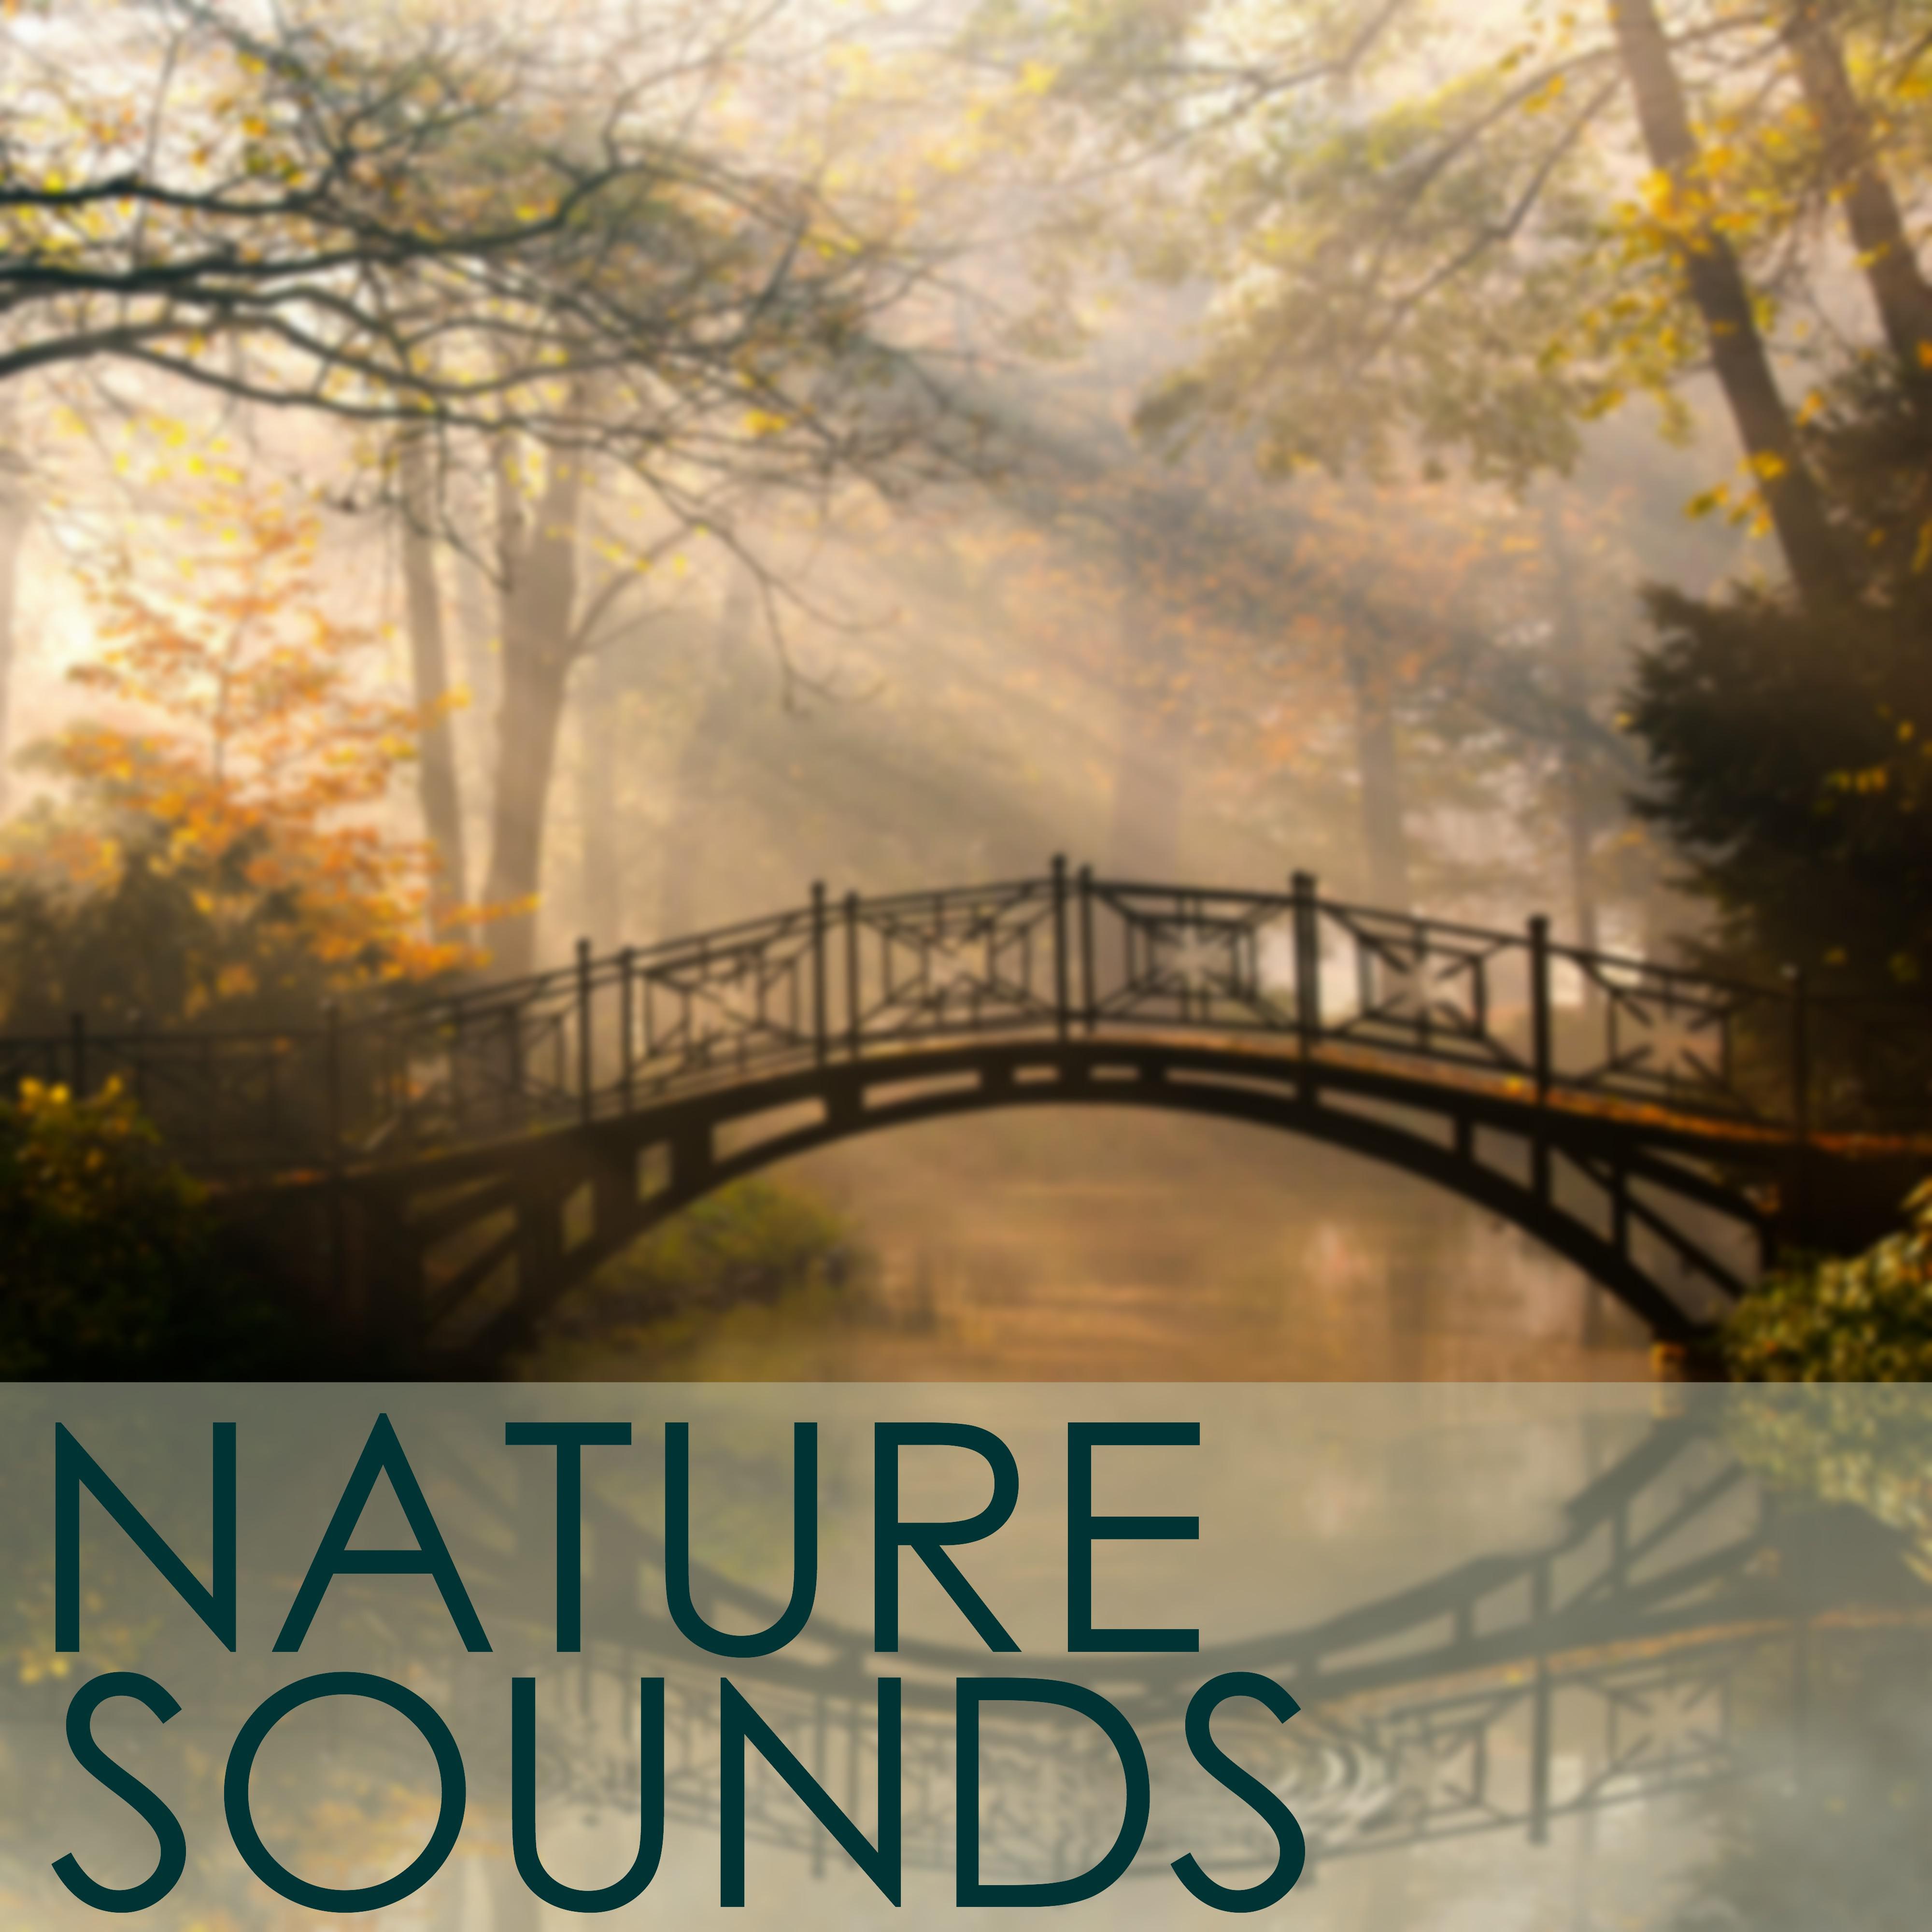 Natural Sound Series - Soft and Light Rain Storm for Deep Massage, Relaxtaion, Yoga, Meditation & Brain Stimulation for Brain Power